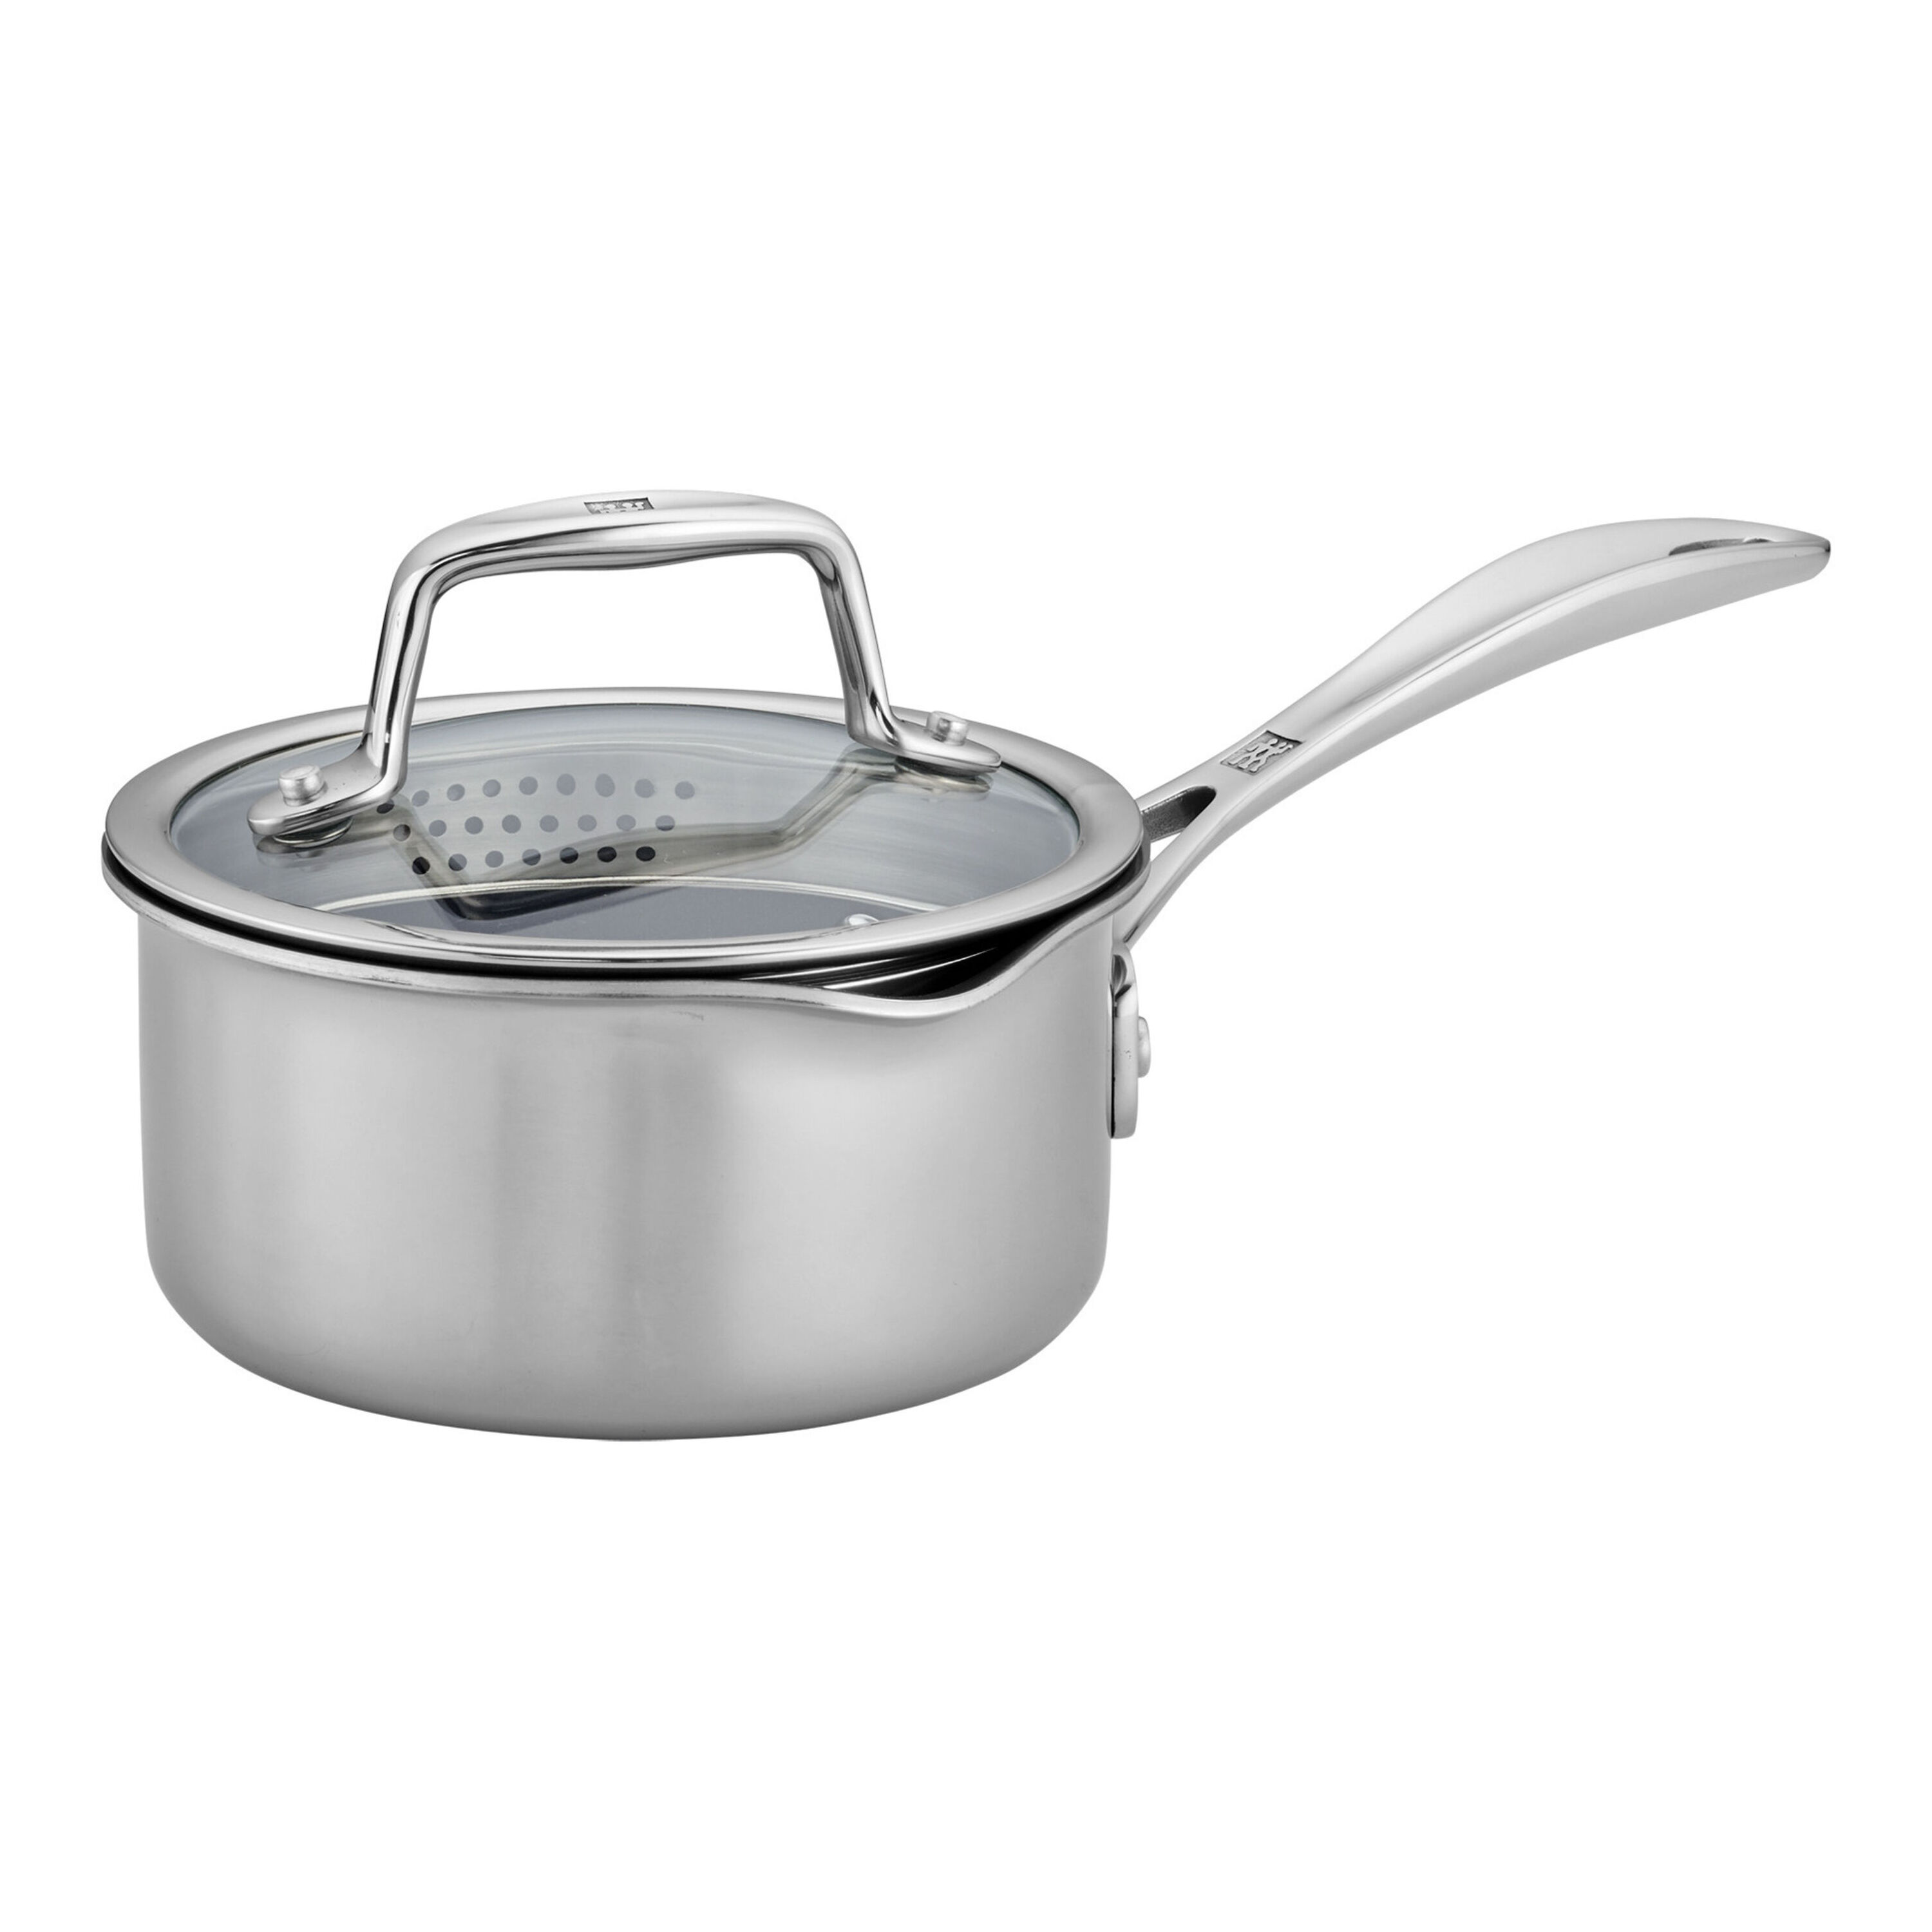 1 Quart Non-Stick Steel Gray Open Sauce Pan, Stay-Cool Handle